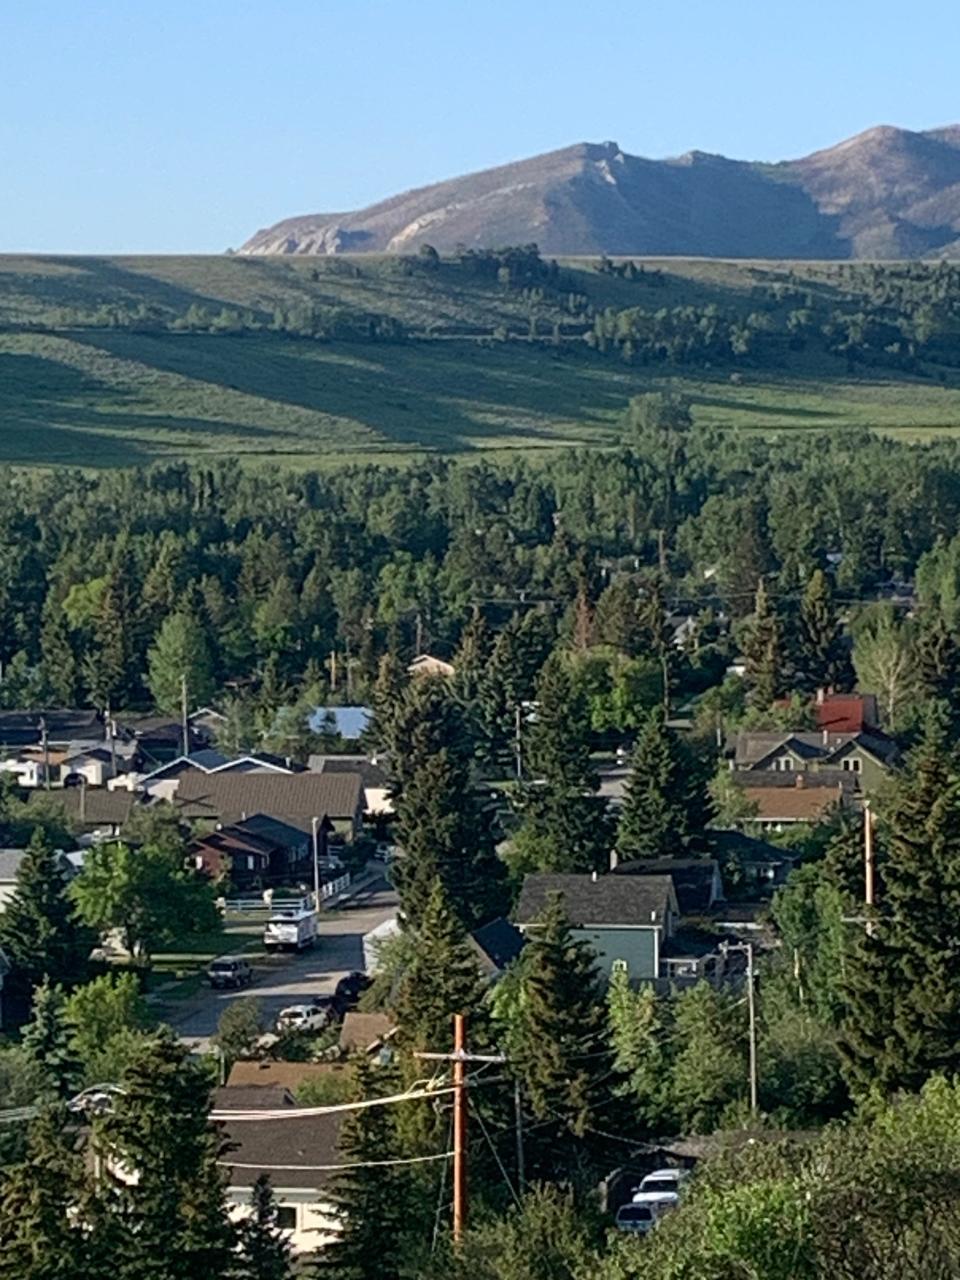 The town of Red Lodge sits in a valley between two "benches" at the foothills of the eastern Rockies in south-central Montana. Columnist Carrie Seidman is currently on a writer's retreat in Red Lodge.